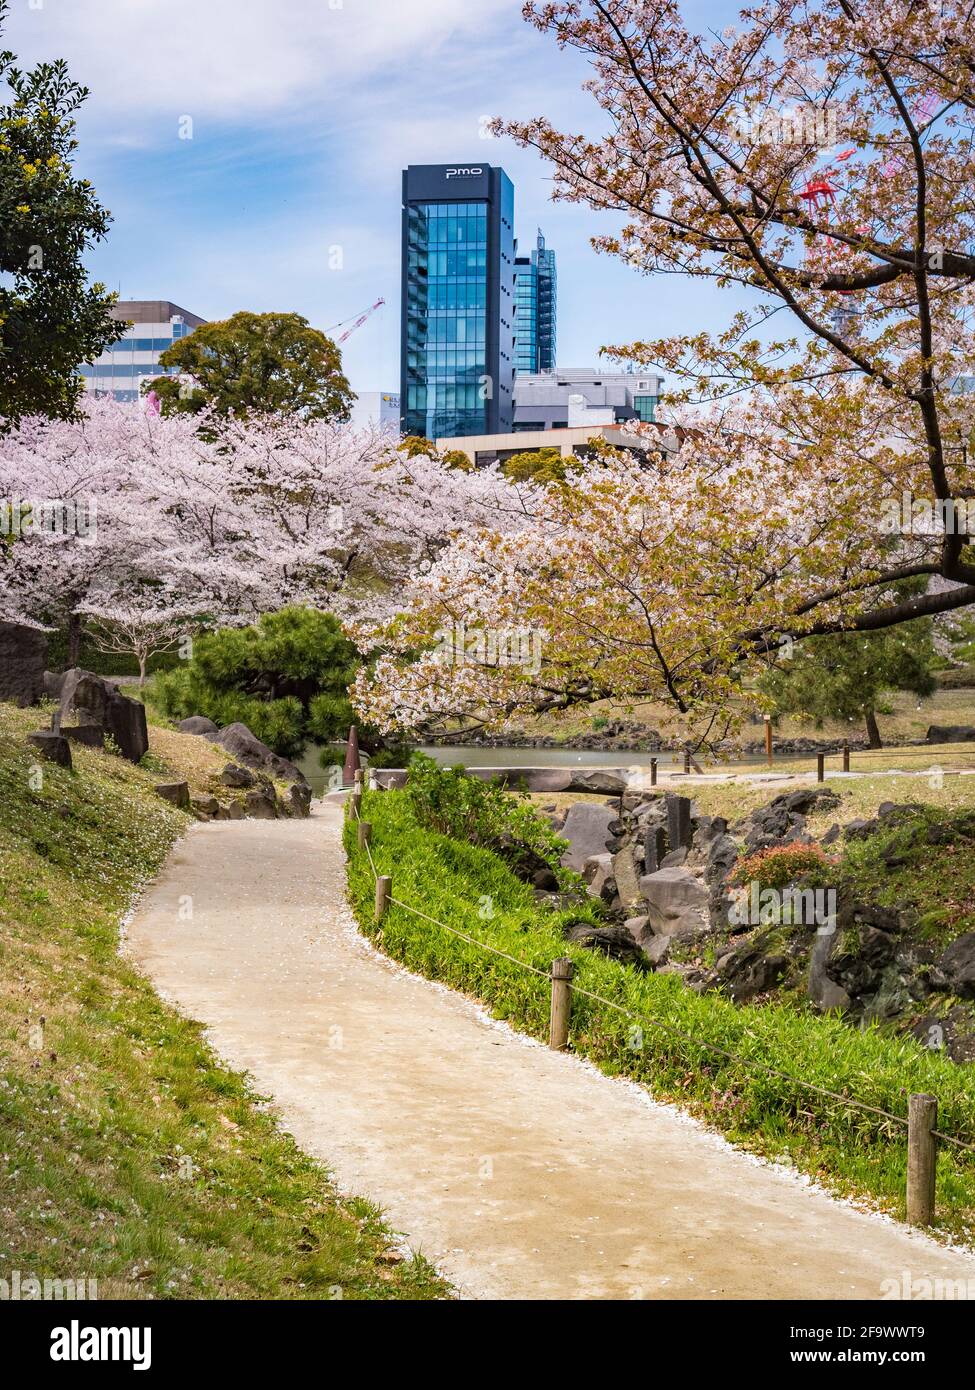 5 April 2019: Tokyo, Japan - Path and cherry blossom in Kyu-Shiba-rikyu Gardens, a traditional style landscape garden in central Tokyo. Stock Photo